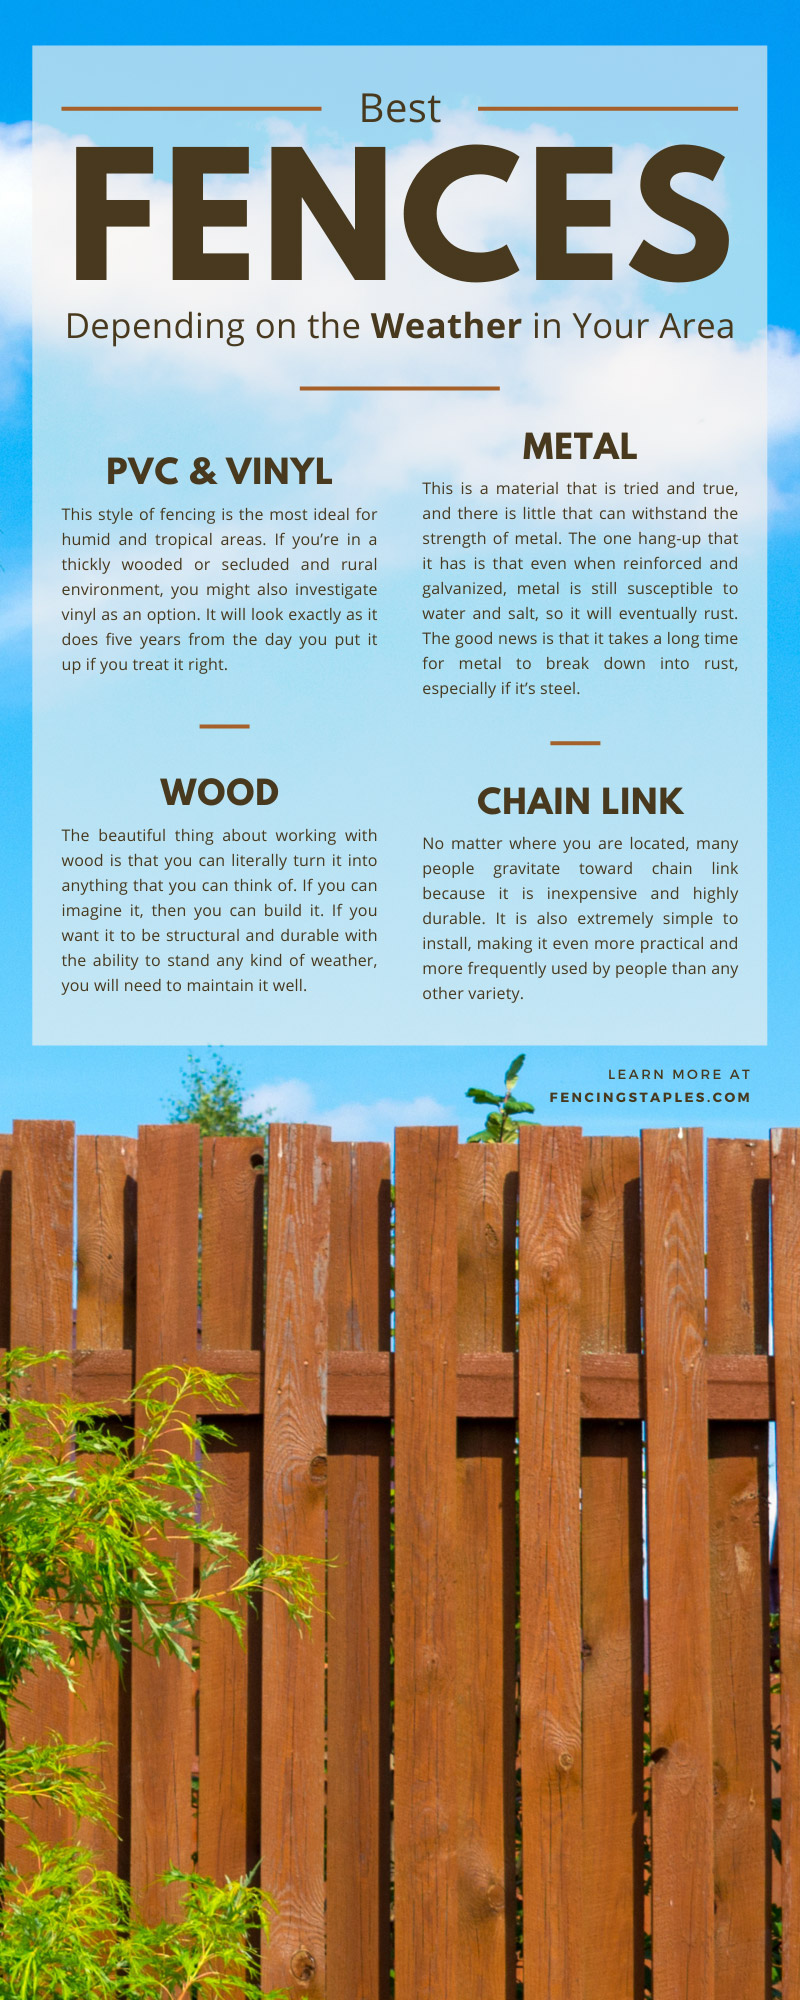 Best Fences Depending on the Weather in Your Area